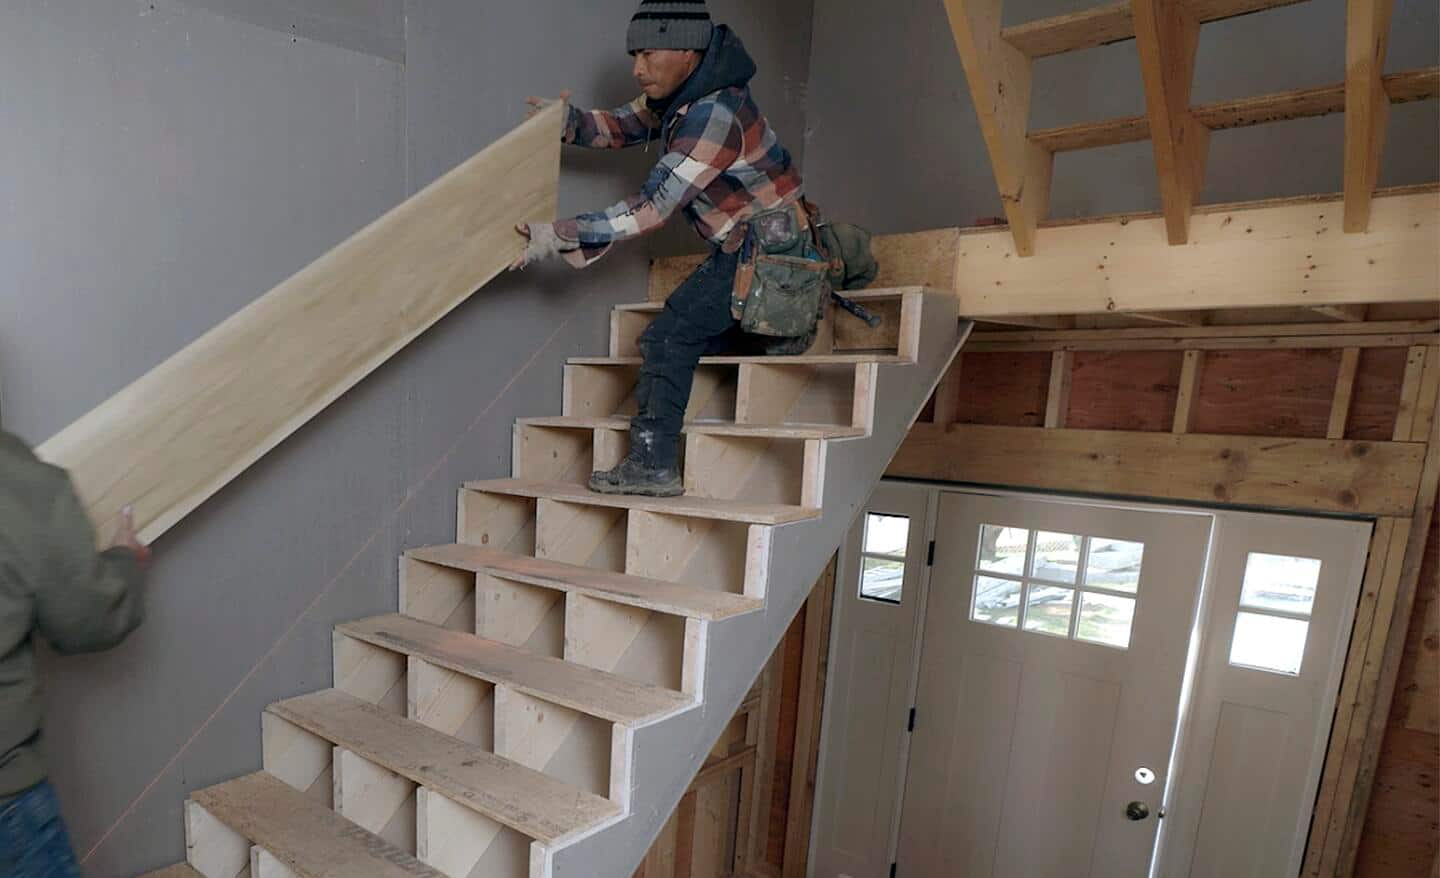 Workers move a 1x12 skirtboard into place to install it in a staircase that is under construction.